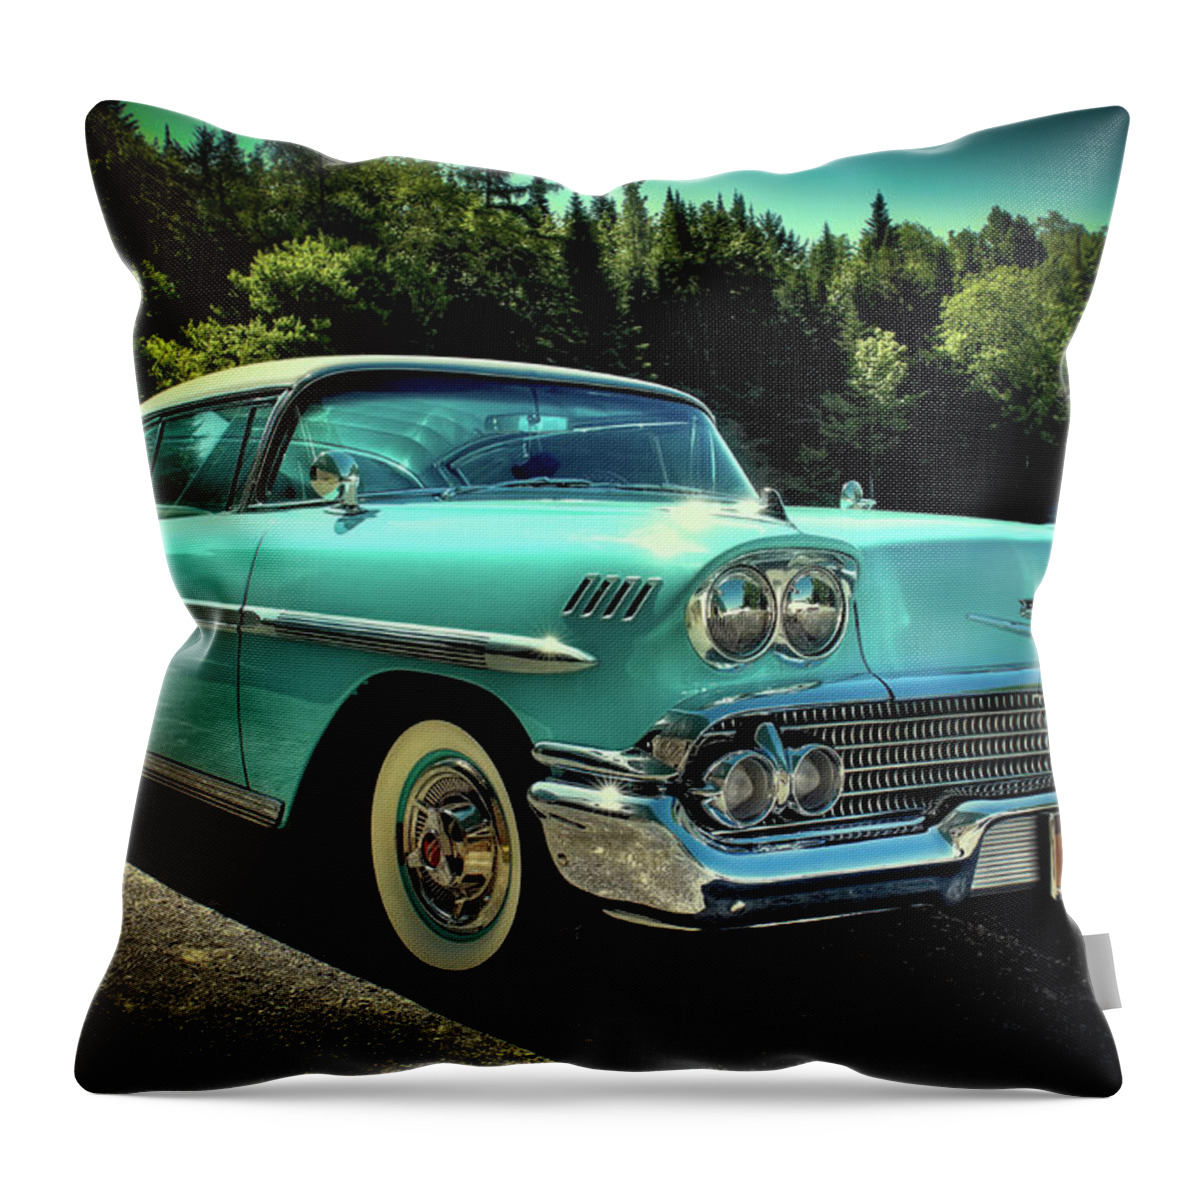 58 Throw Pillow featuring the photograph 1958 Chevrolet Impala by David Patterson